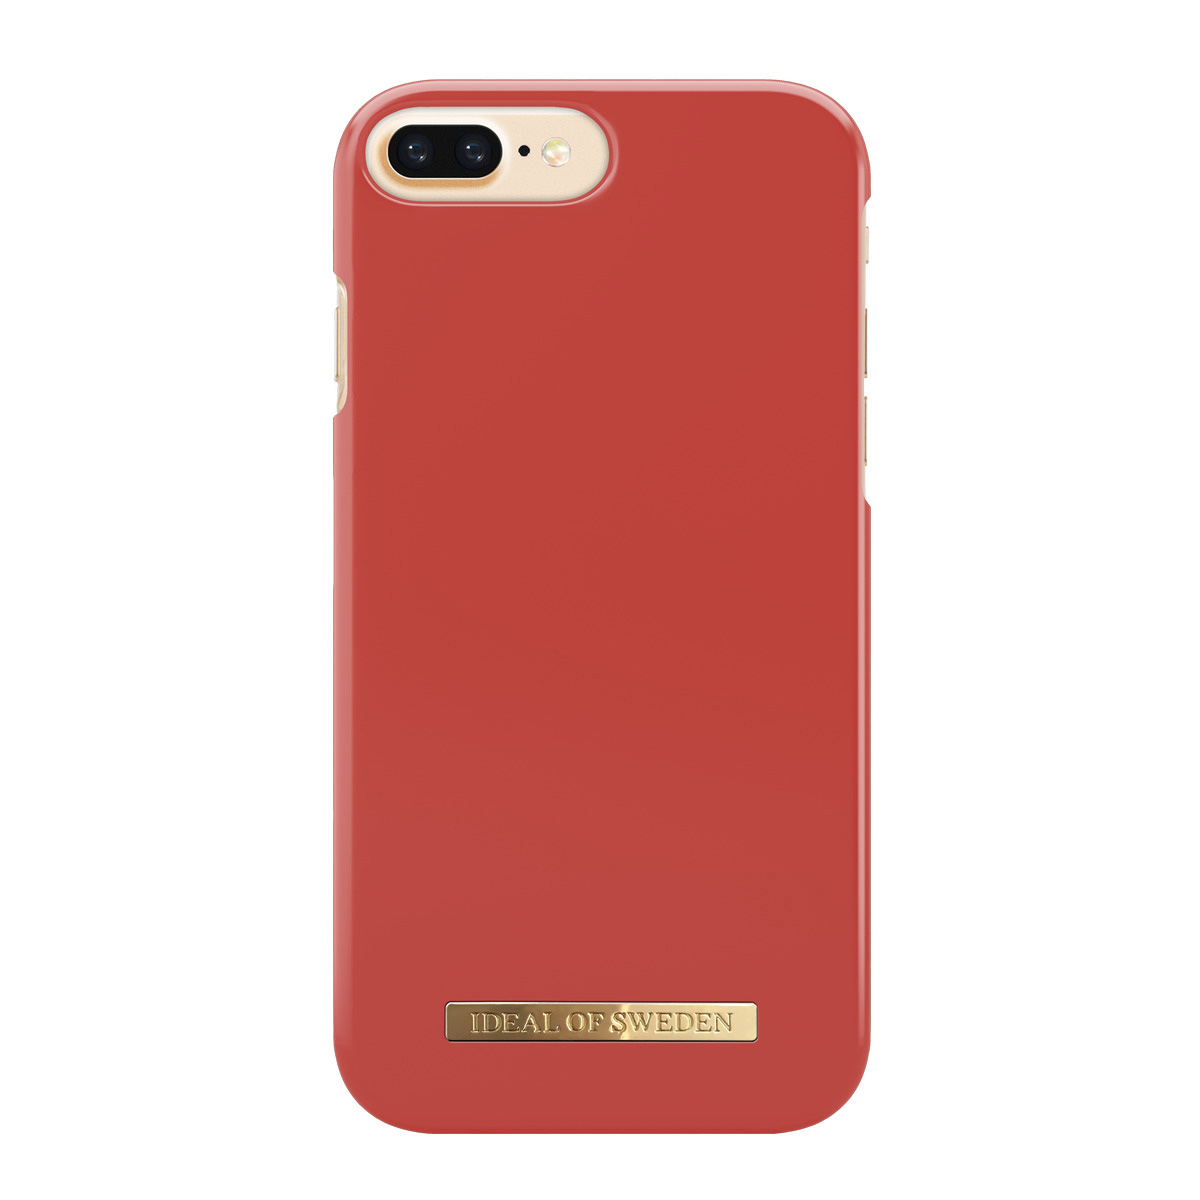 Fashion, 6 7 iPhone Backcover, Plus iPhone Aurora 8 Plus, SWEDEN Apple, OF Red Plus, ,iPhone IDEAL